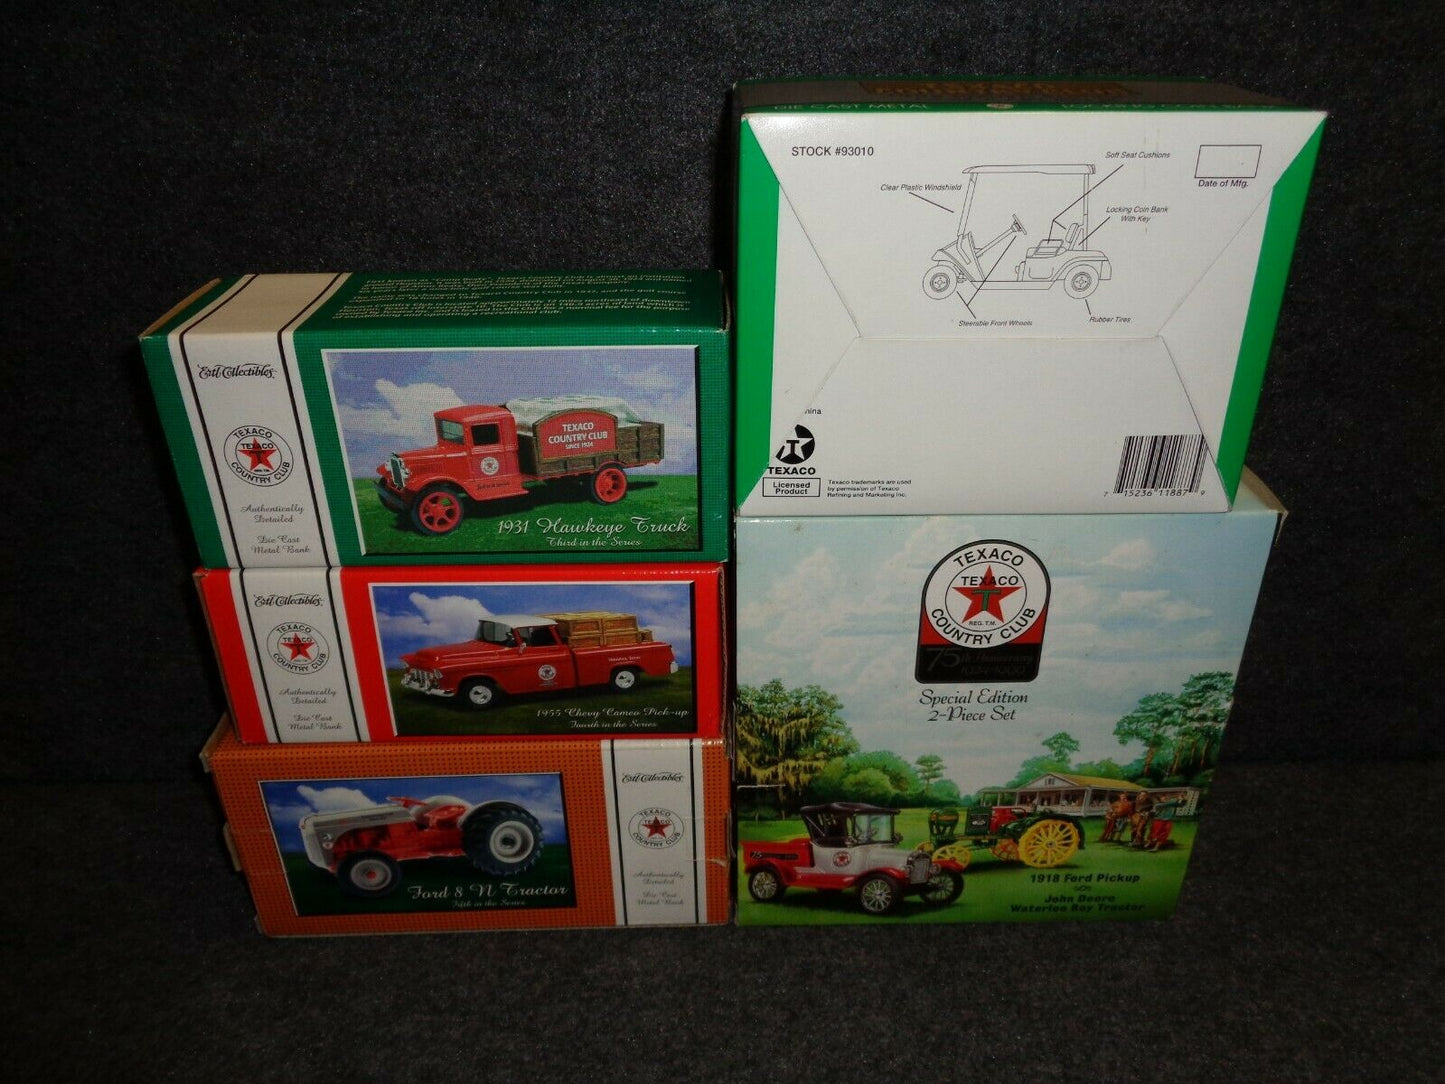 Texaco Country Club Series Set of 5 - 1918 Ford Runabout, Golf Cart, 1931 Hawkeye Stake, 1955 Chevy Cameo & Ford 8 N Tractor